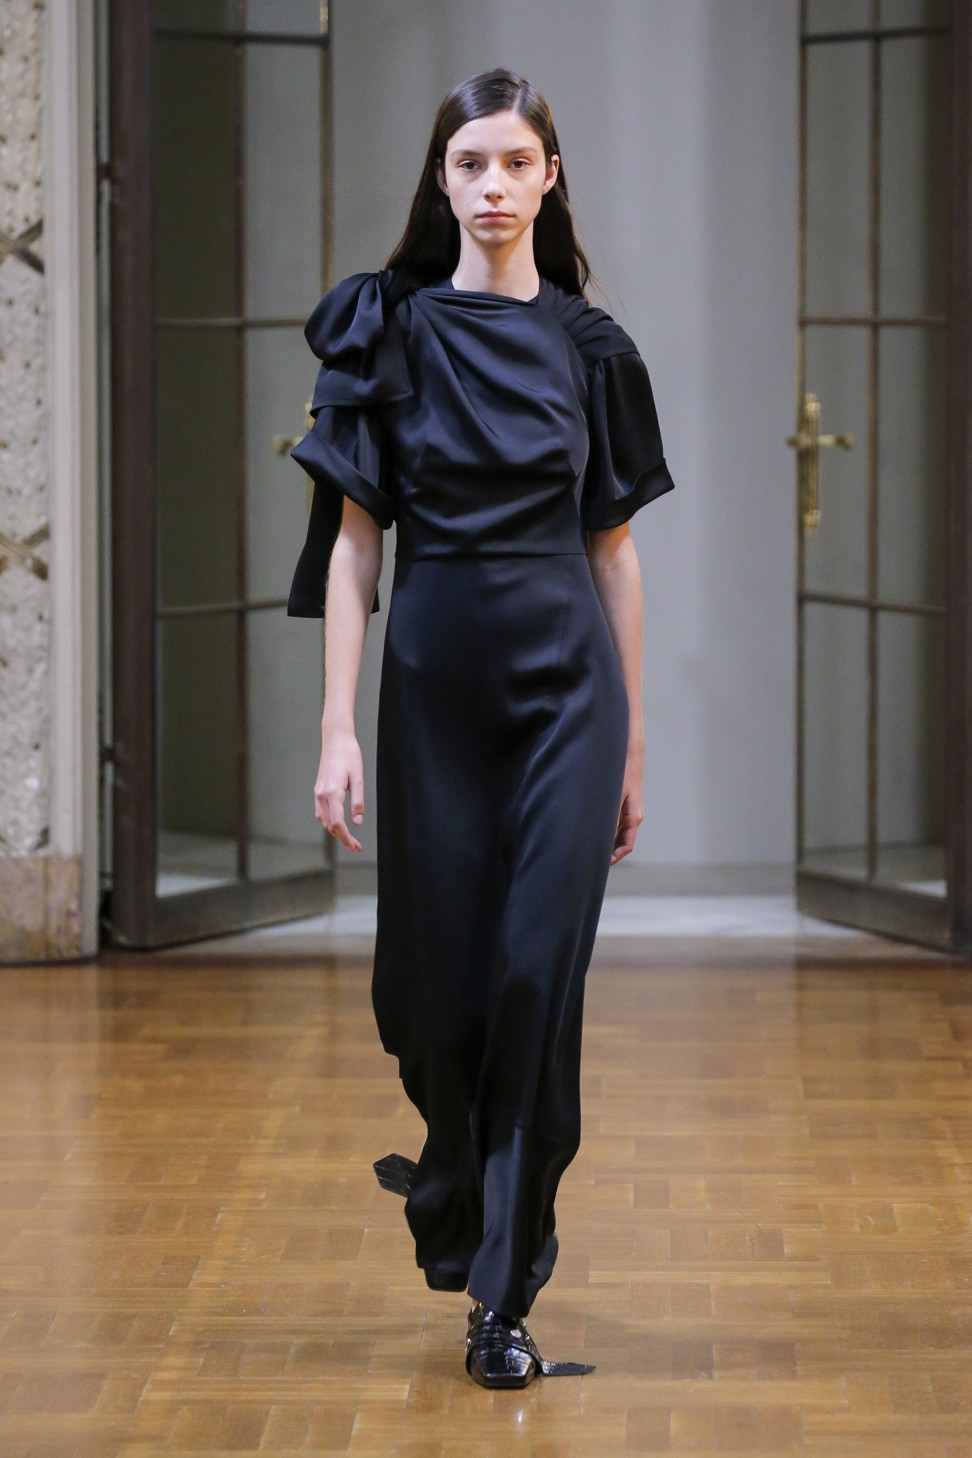 One of the looks in Victoria Beckham’s collection at New York Fashion Week. Photo: Courtesy of Victoria Beckham via AP